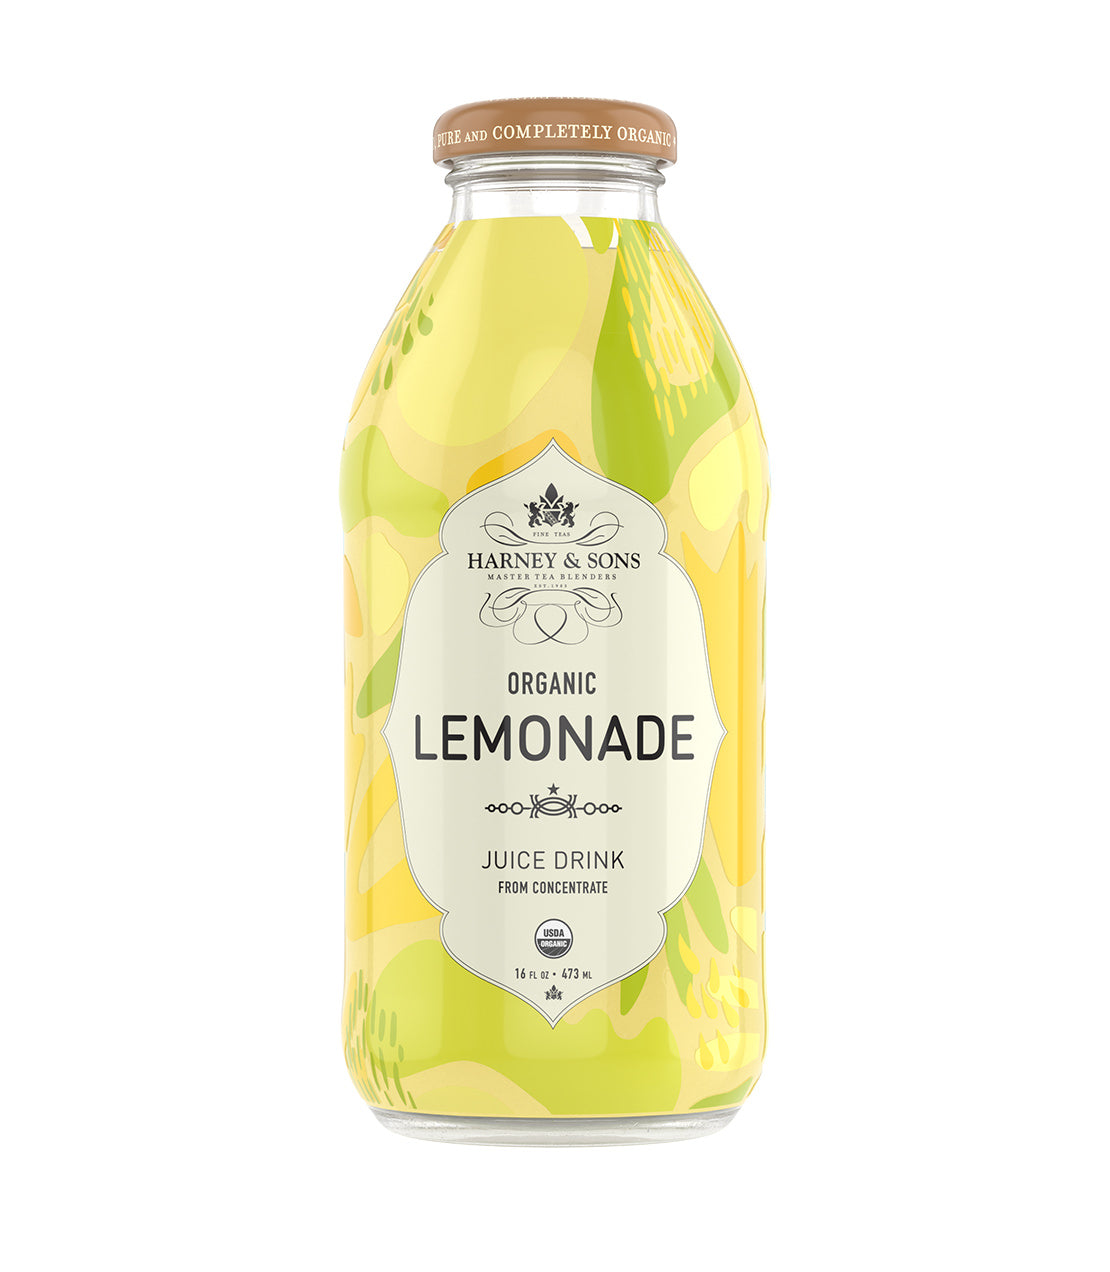 Pure Leaf Launches Three Lower Sugar Iced Teas for Summer 2022